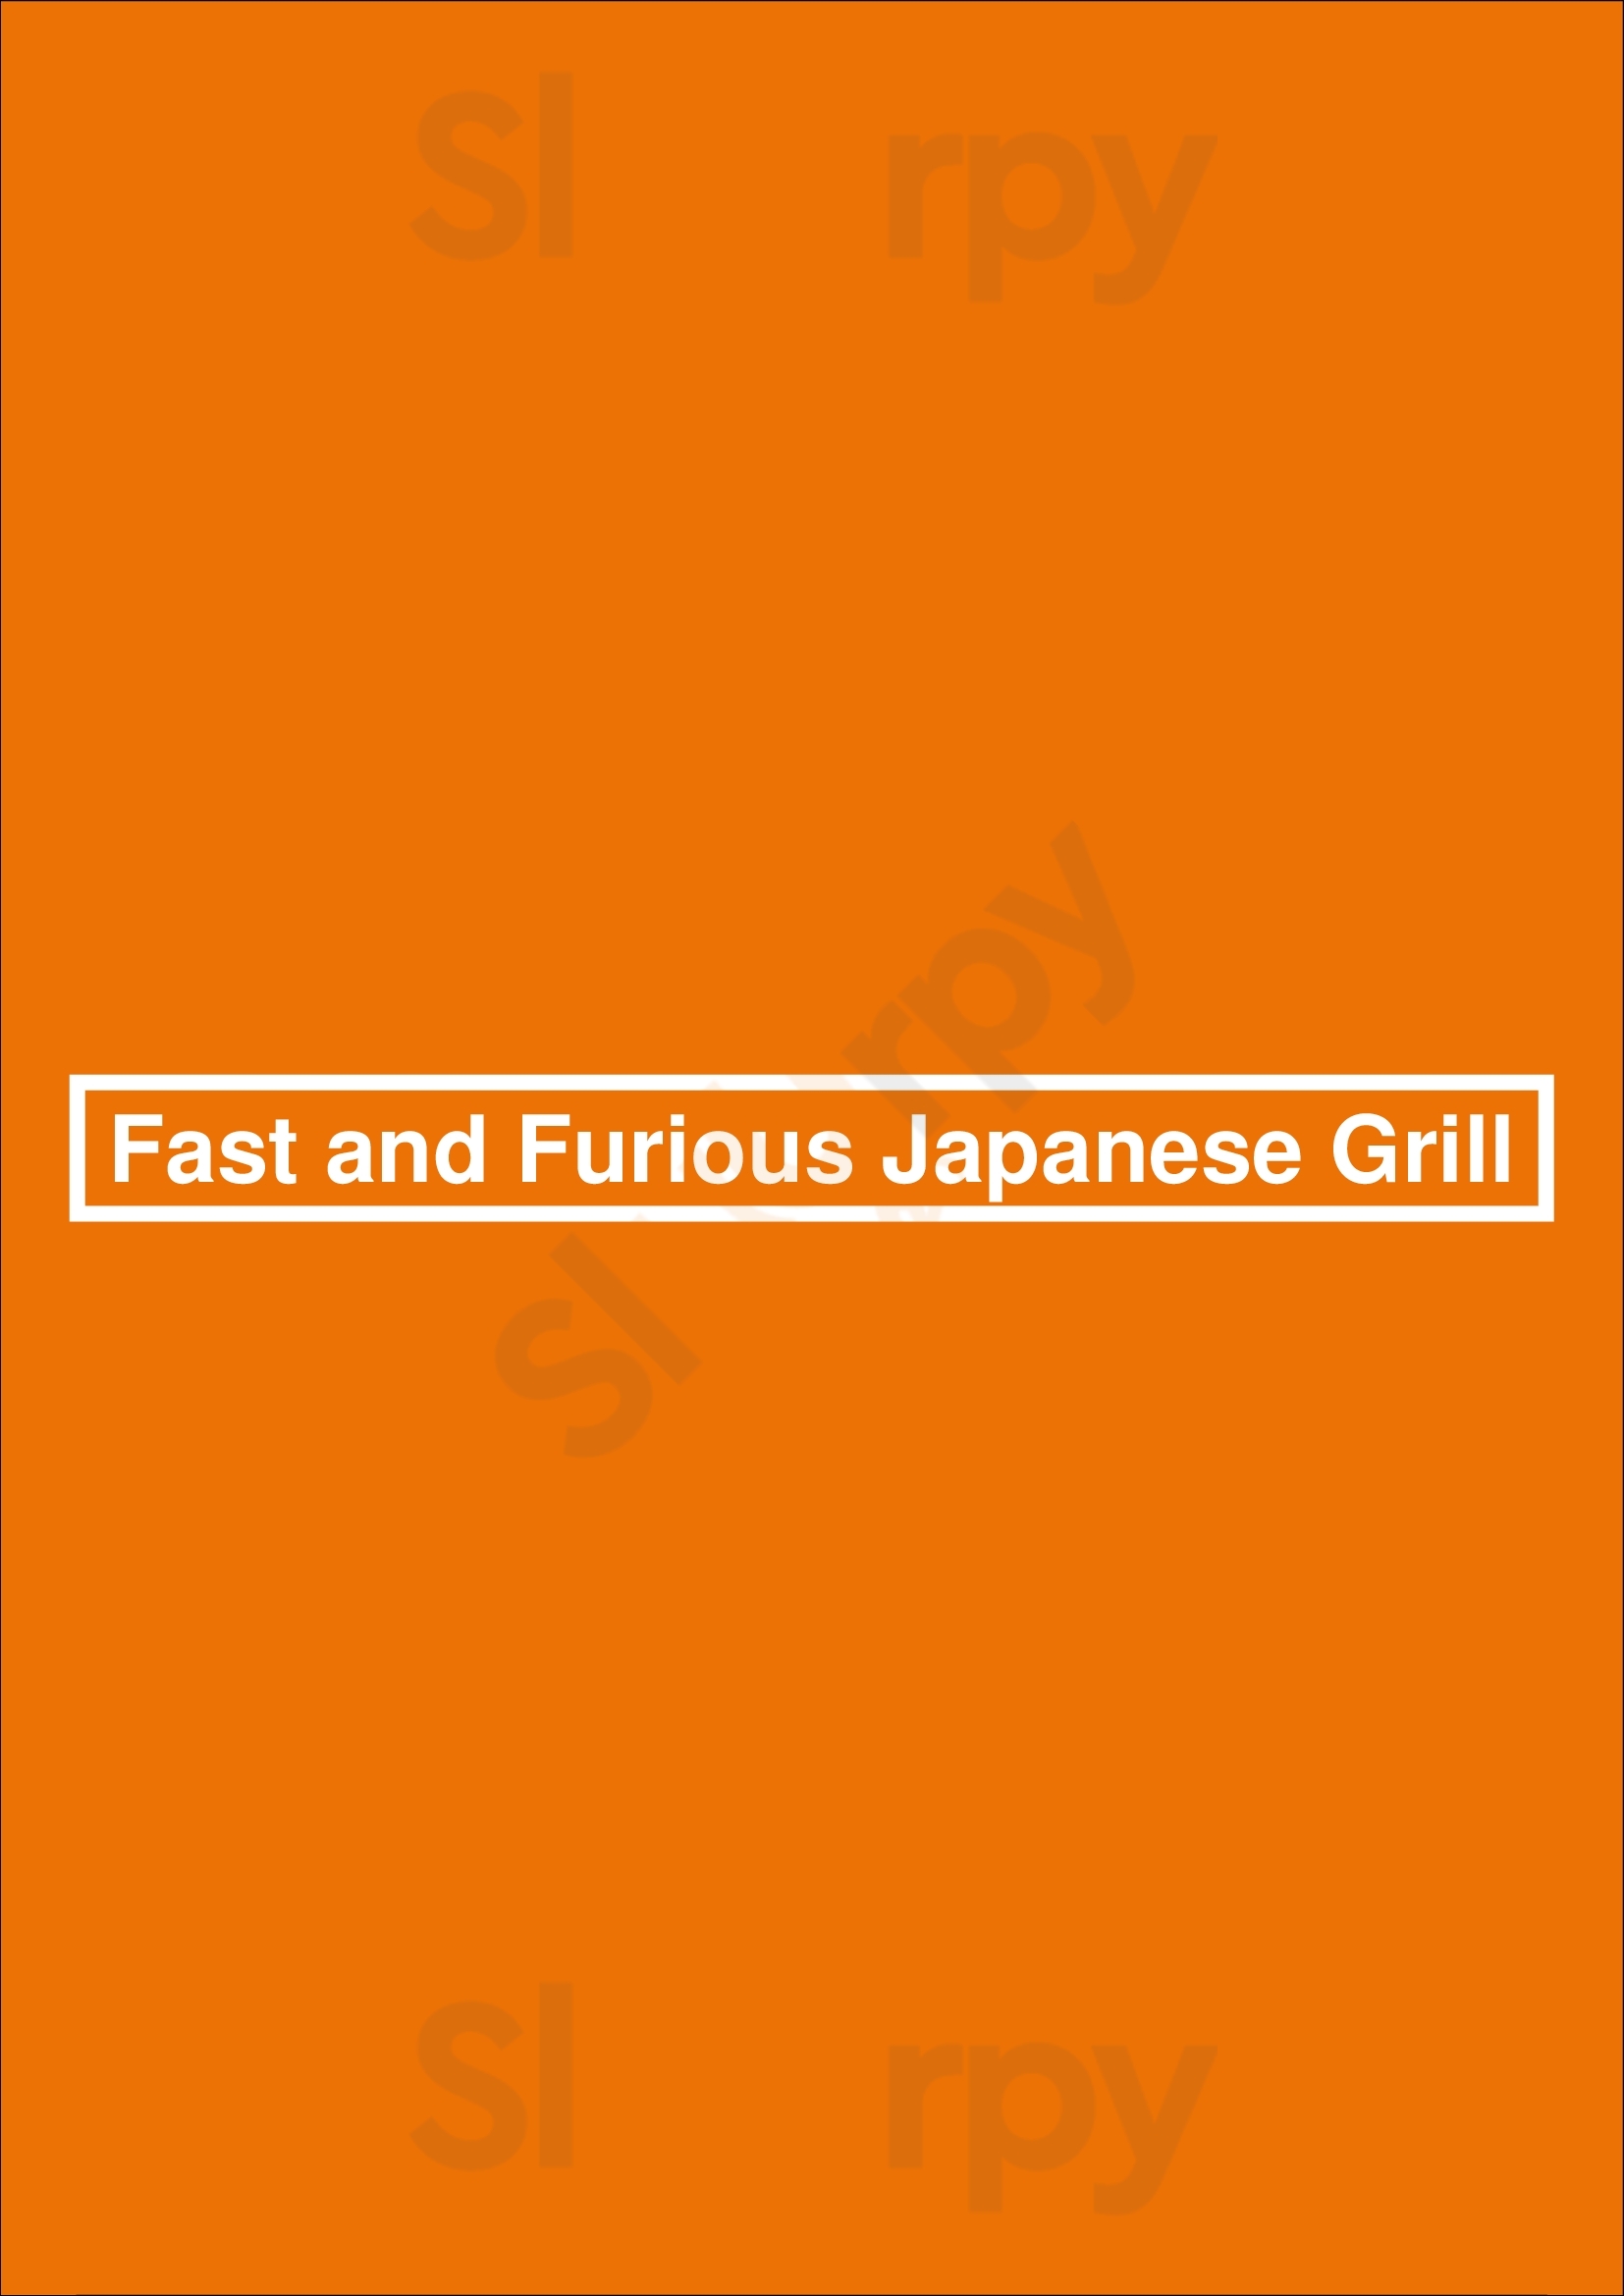 Fast And Furious Japanese Grill Dallas Menu - 1